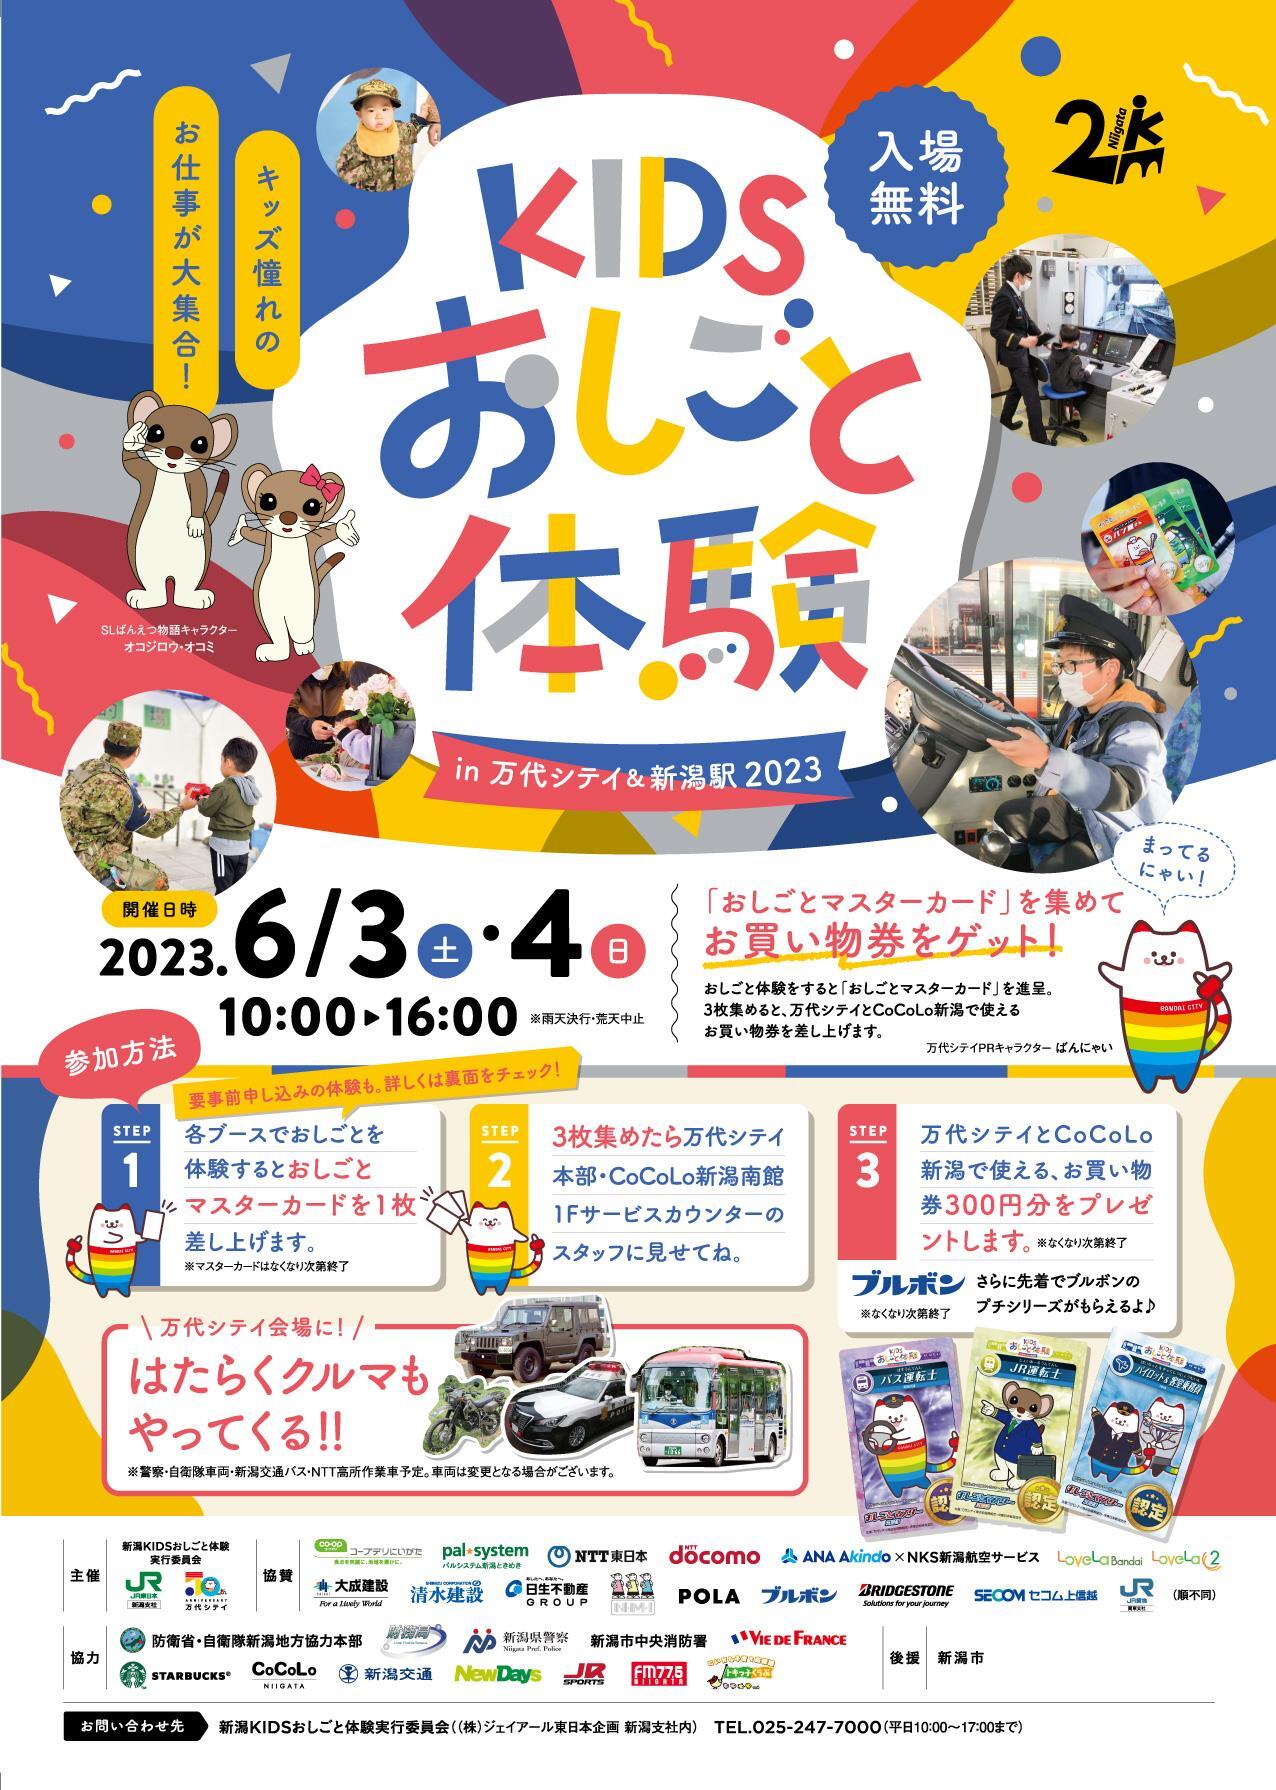 KIDSおしごと体験 in 万代シテイ＆新潟駅2023